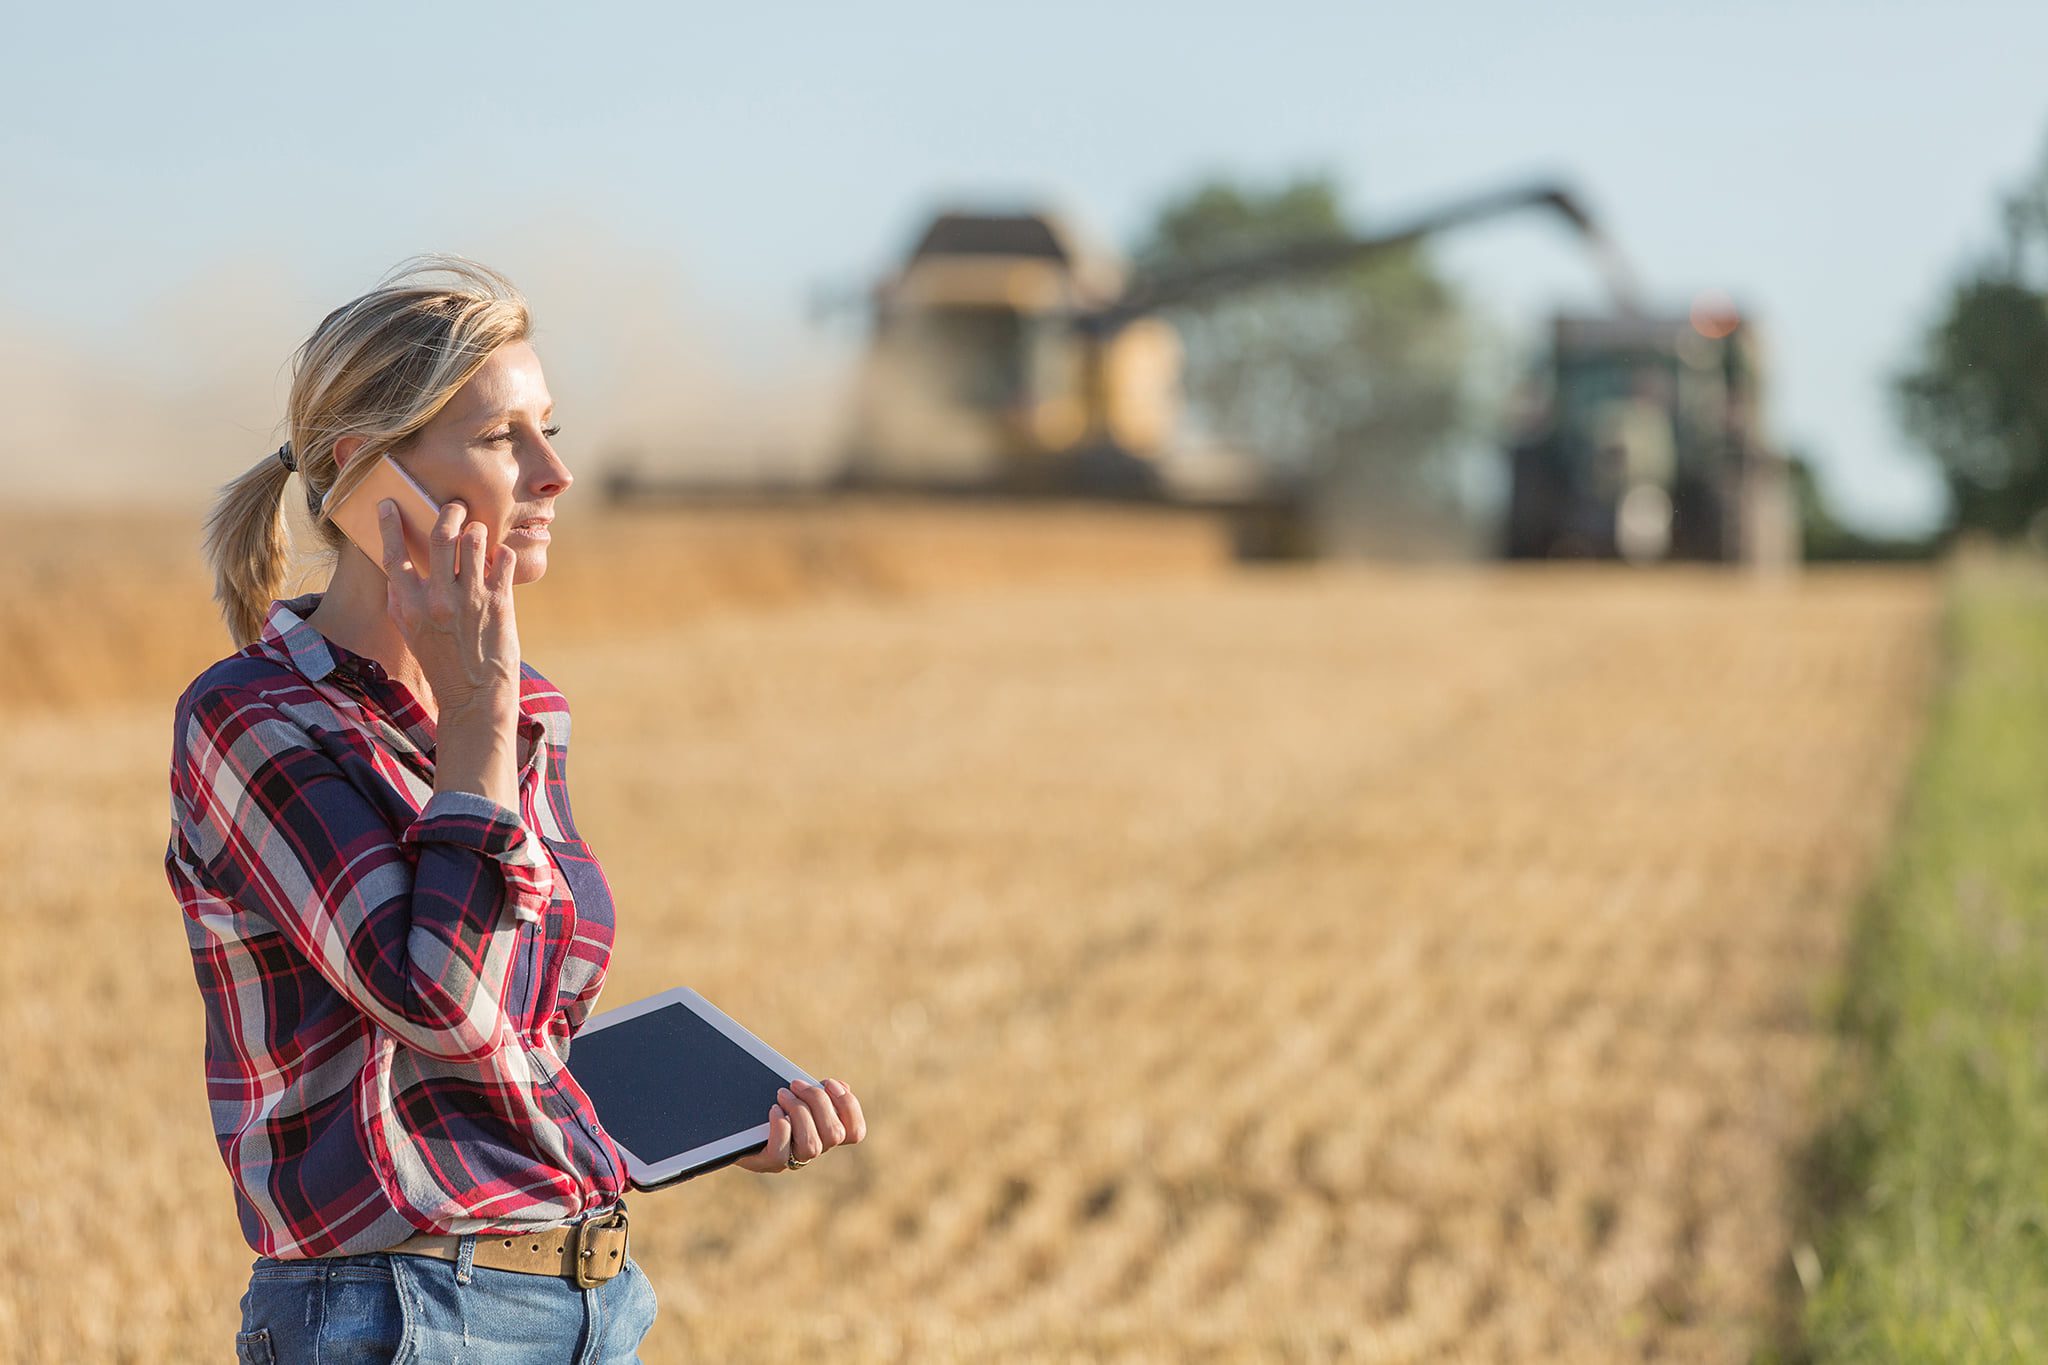 Woman Uses Wireless Service on a Rural Farm